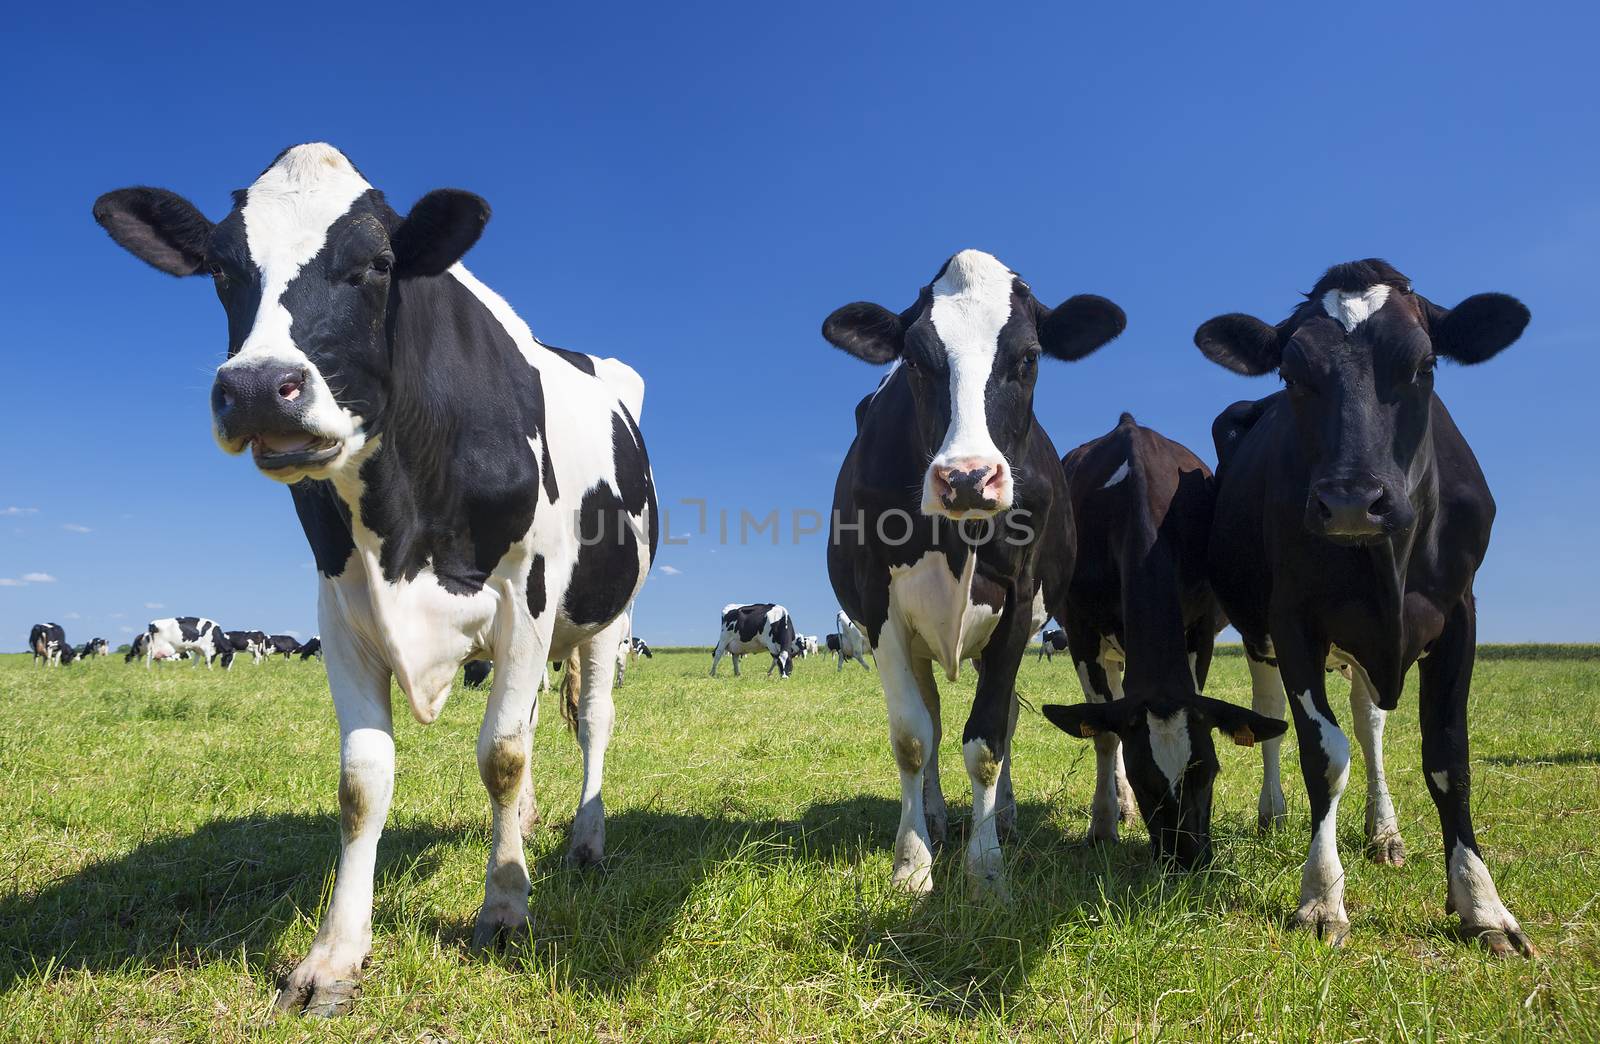 Cows on green grass with blue sky